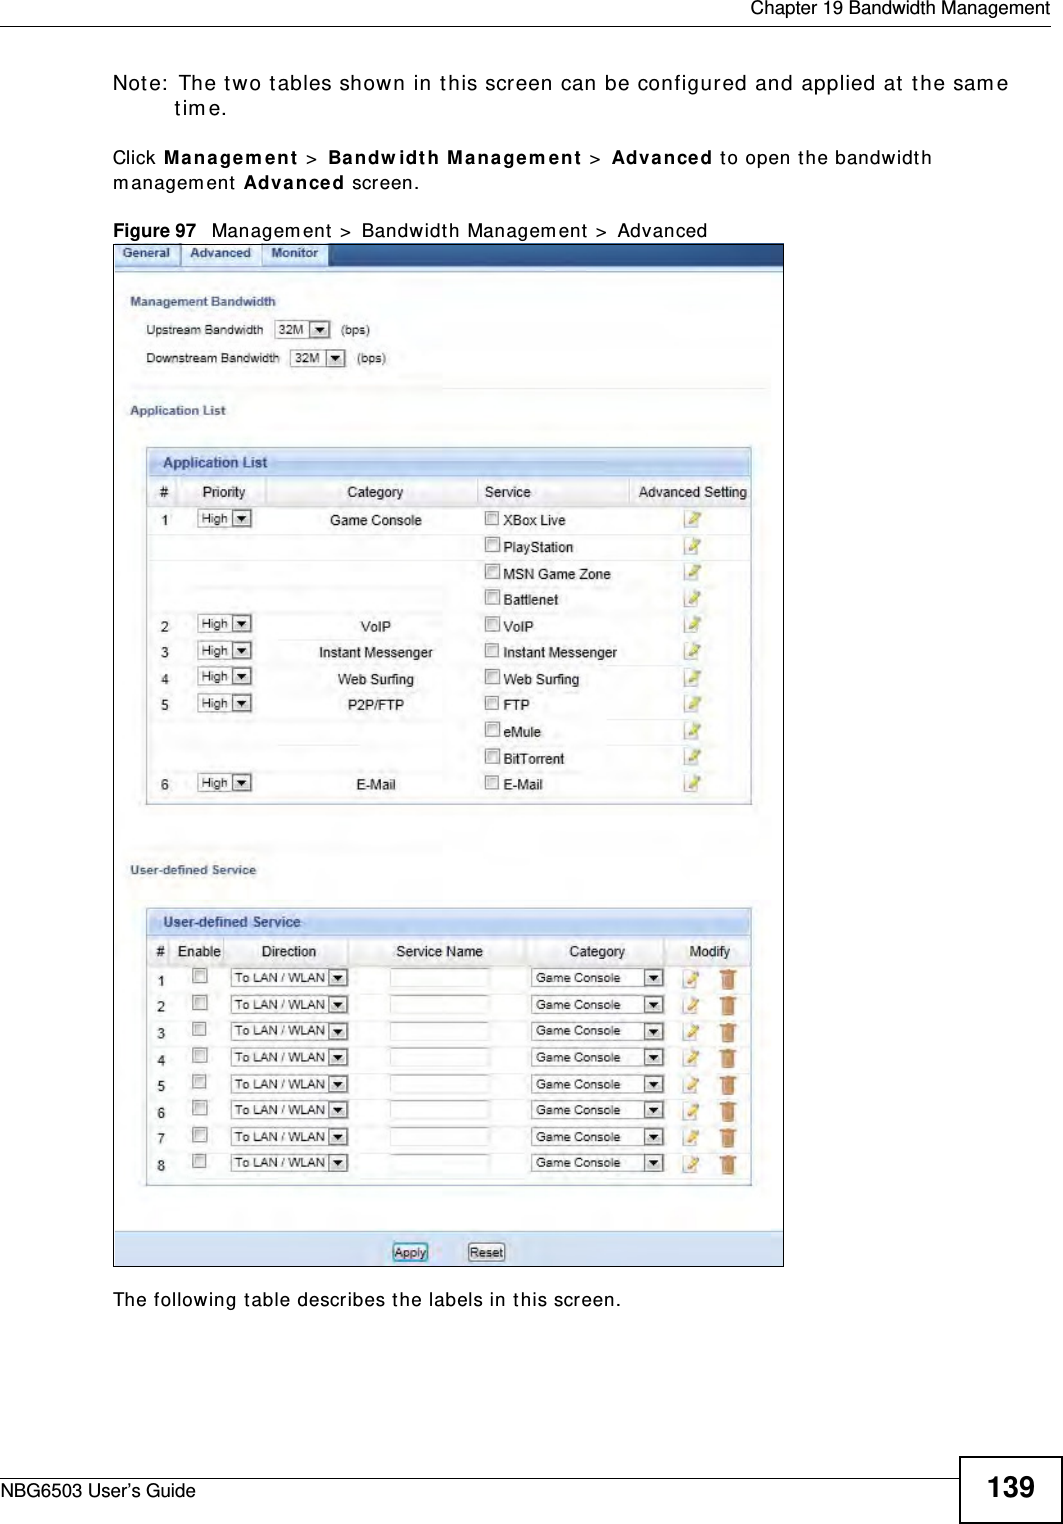  Chapter 19 Bandwidth ManagementNBG6503 User’s Guide 139Note: The two tables shown in this screen can be configured and applied at the same time. Click Management &gt; Bandwidth Management &gt; Advanced to open the bandwidth management Advanced screen.Figure 97   Management &gt; Bandwidth Management &gt; Advanced The following table describes the labels in this screen.